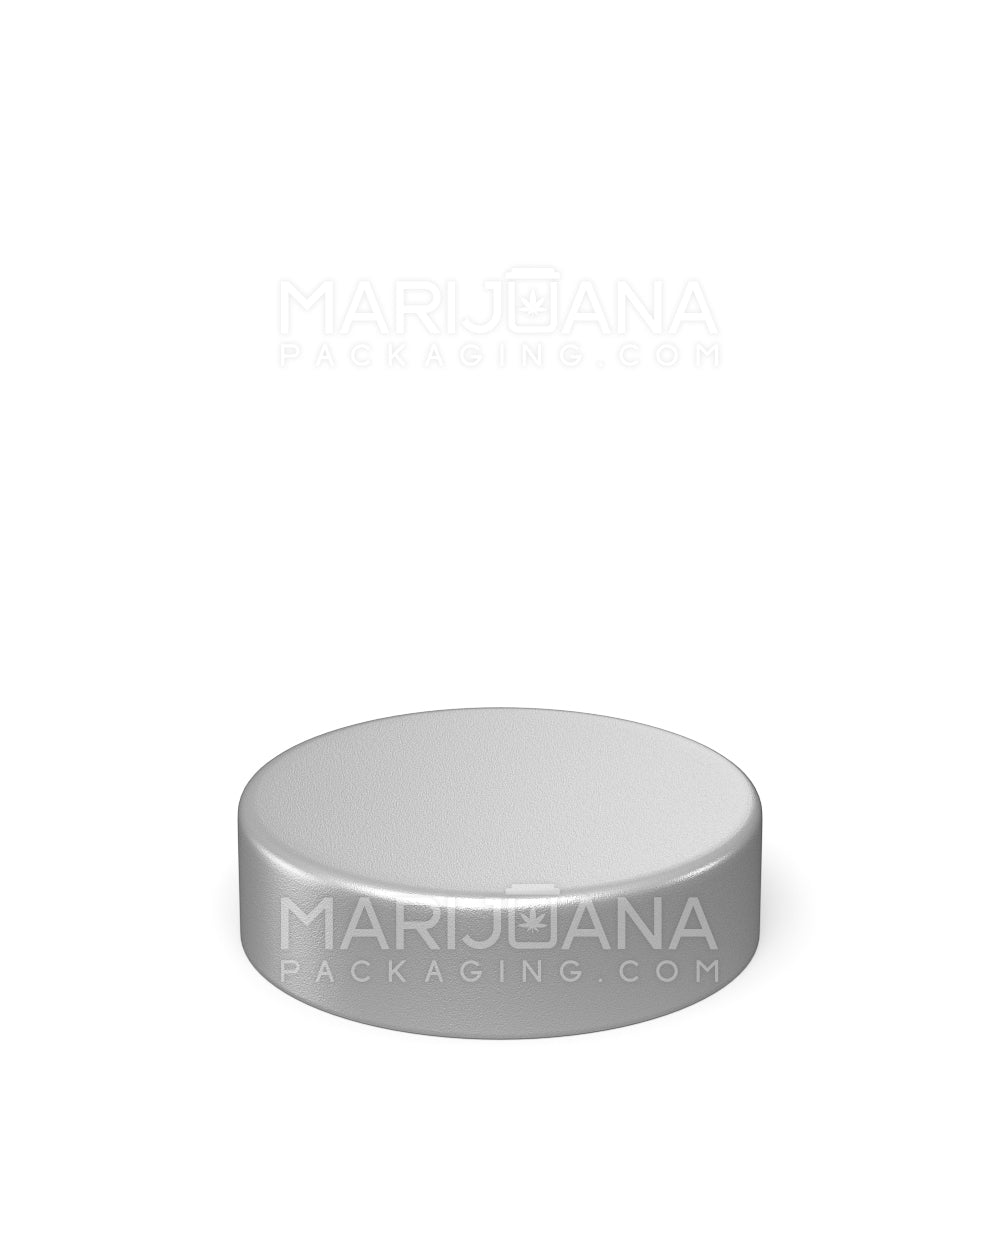 Child Resistant | Smooth Flat Push Down & Turn Plastic Caps w/ Foam Liner | 50mm - Matte Silver - 100 Count - 3